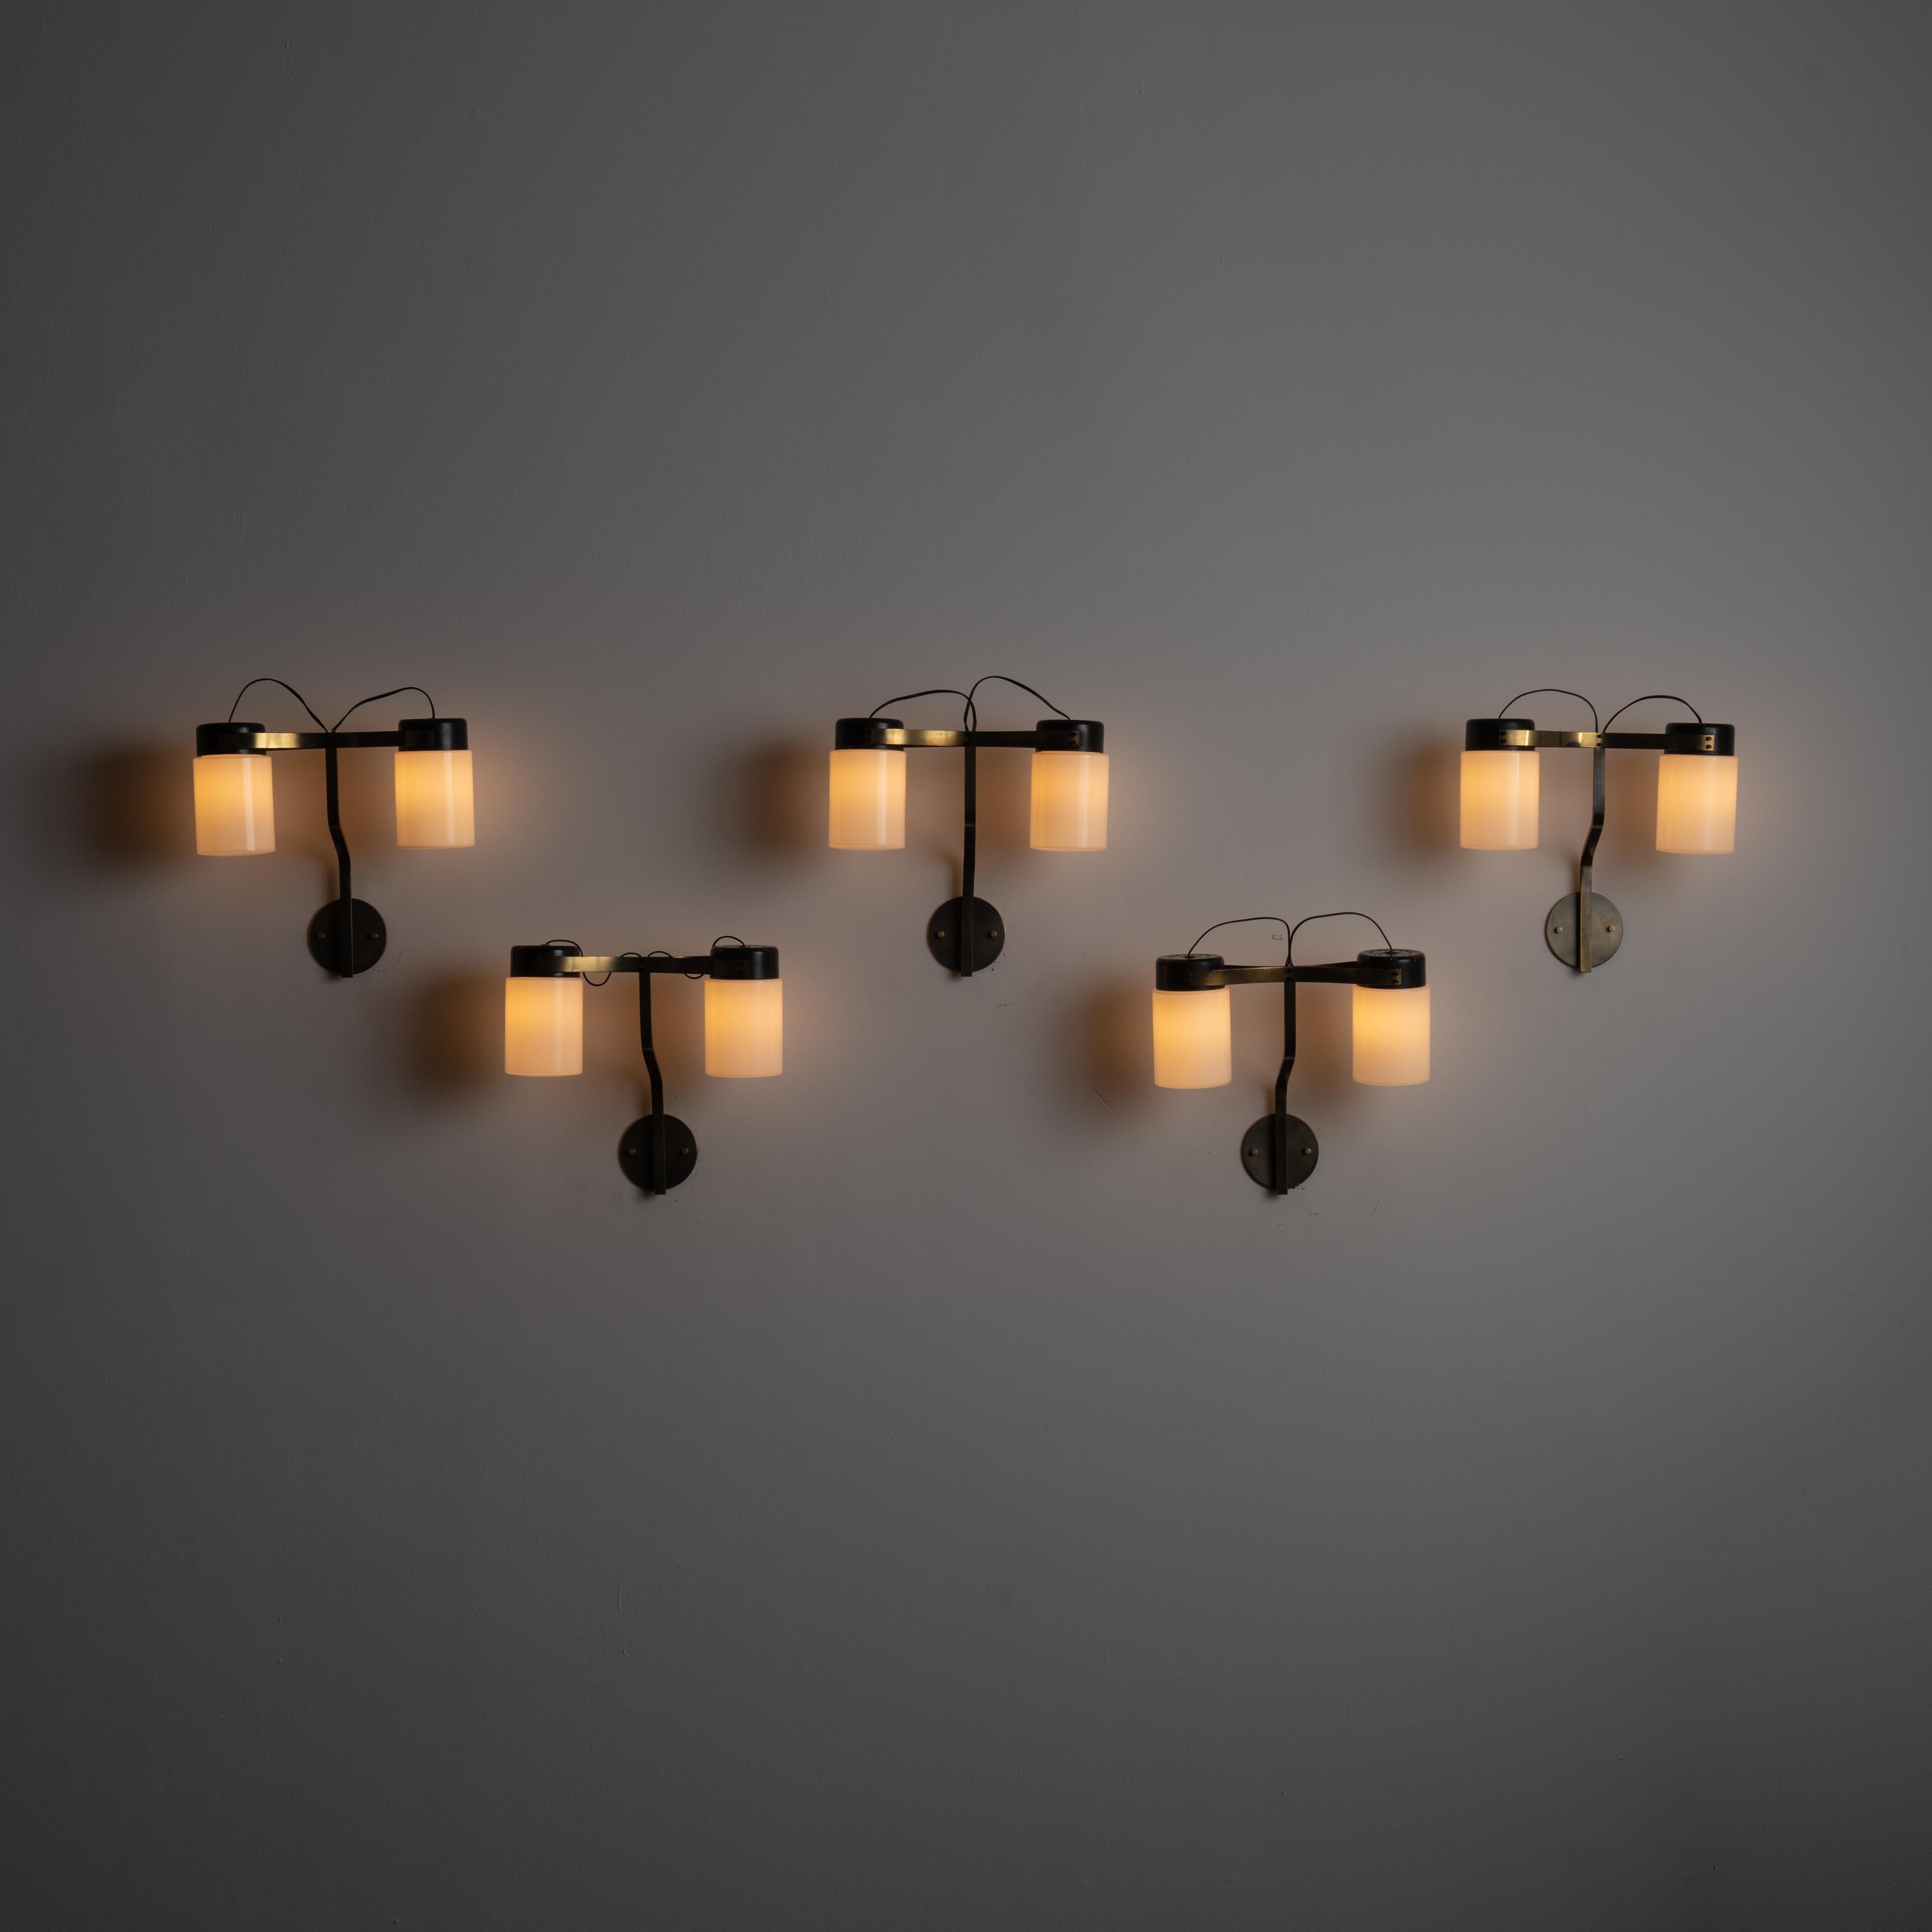 Sconces by Virgina Scoccimarro Galimberti for Adrasteia. Designed and manufactured in Italy, circa the 1950s. Gothic-like double shaded sconces are featured here from Adrasteia. Two screw on opal glass cylinders are hoisted by a burnished brass arm